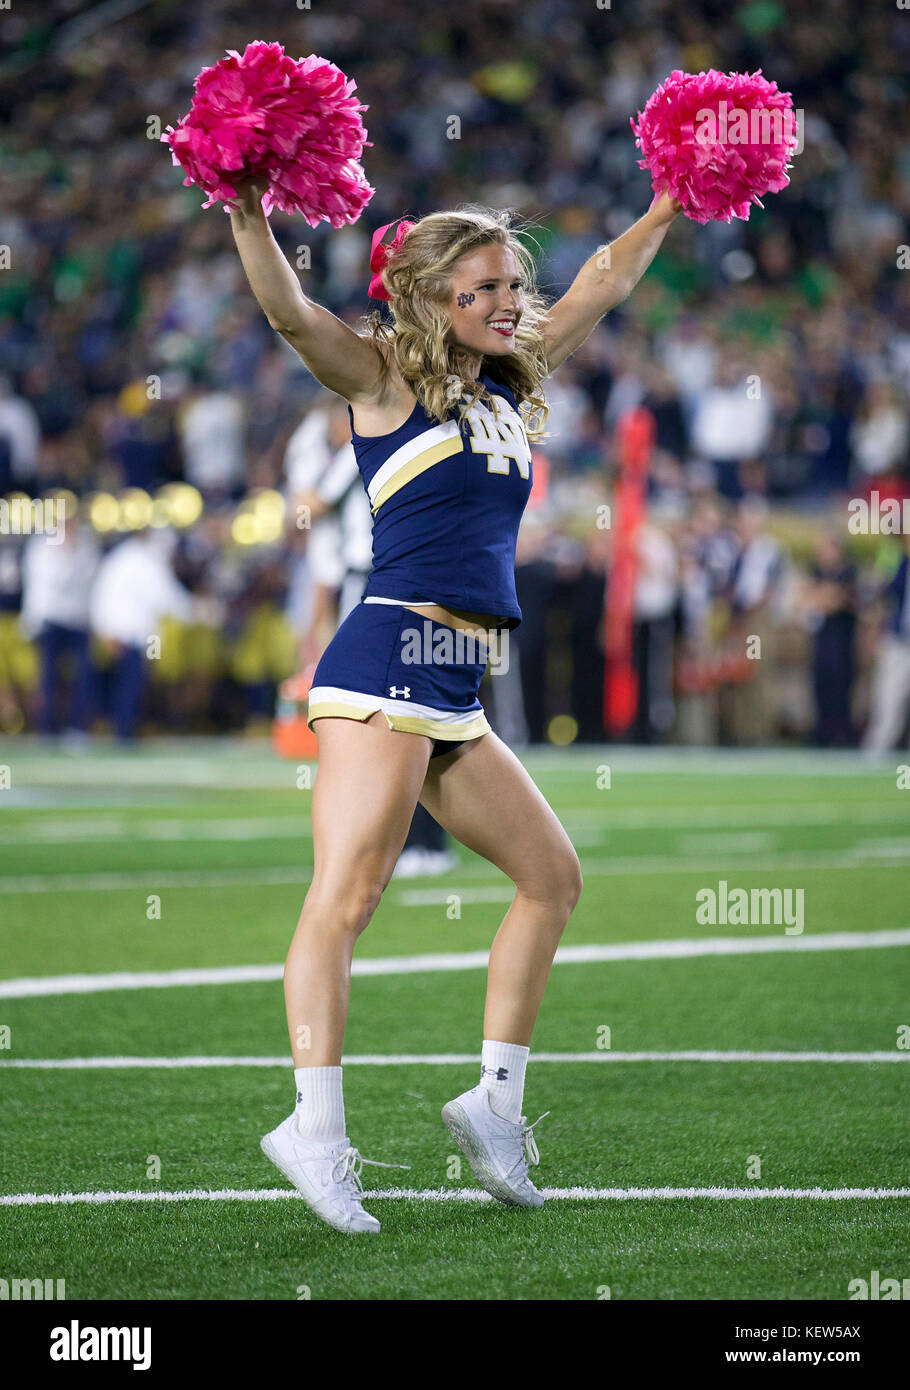 South Bend, Indiana, USA. 21st Oct, 2017. Notre Dame cheerleader performs during NCAA football game action between the USC Trojans and the Notre Dame Fighting Irish at Notre Dame Stadium in South Bend, Indiana. Notre Dame defeated USC 49-14. John Mersits/CSM/Alamy Live News Stock Photo